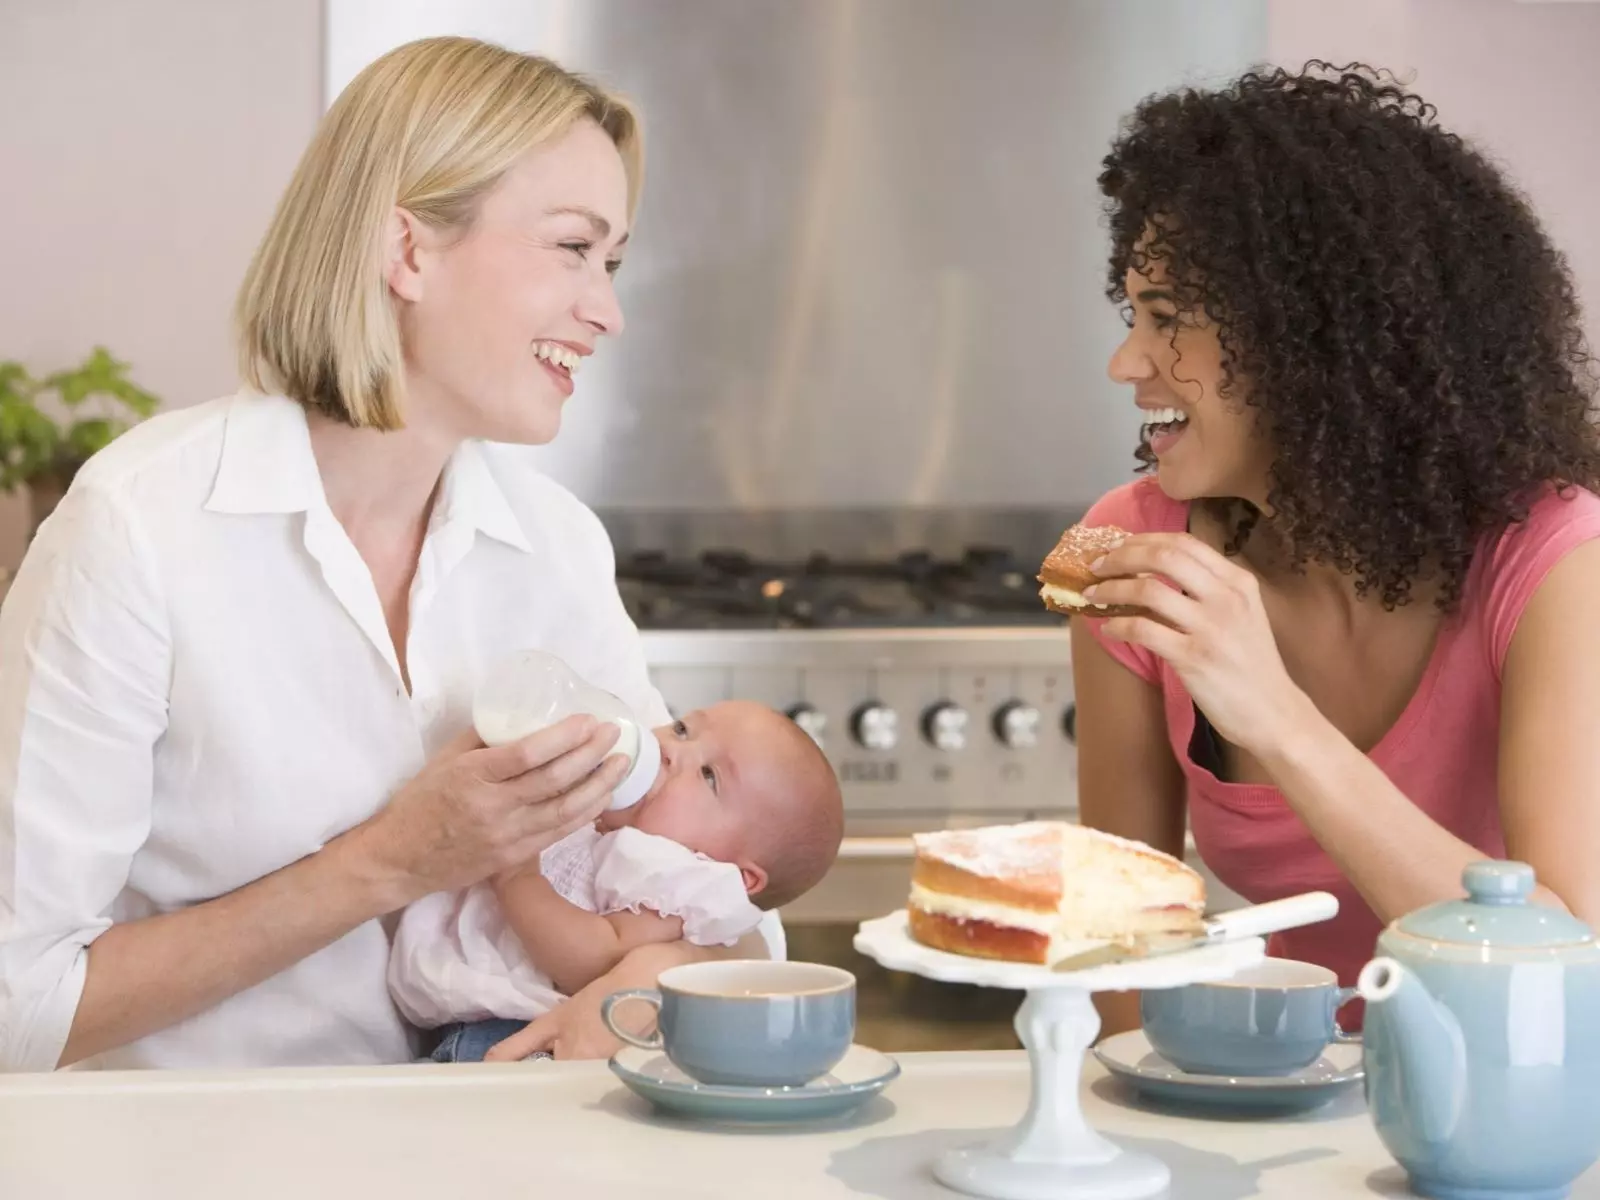 How to support a new mother's postpartum mental health